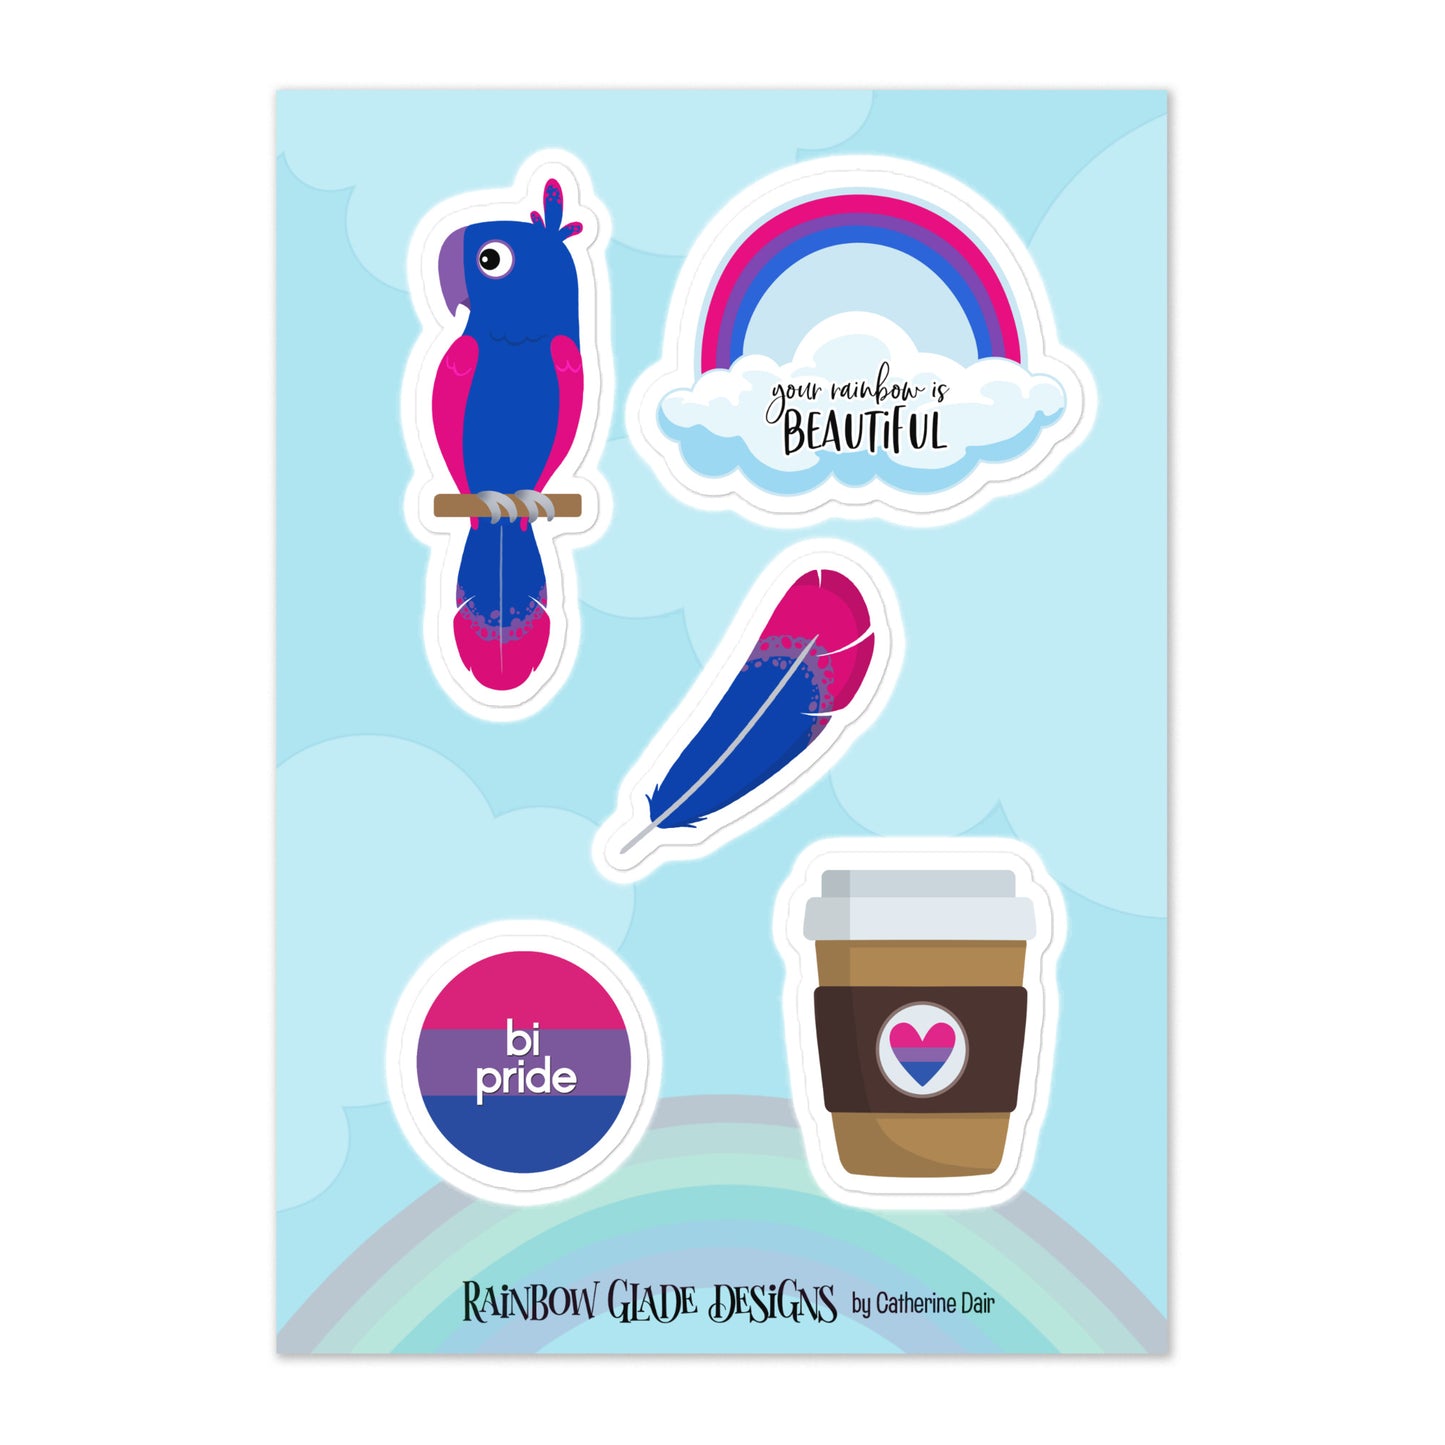 Bisexual Pride Sticker Collection